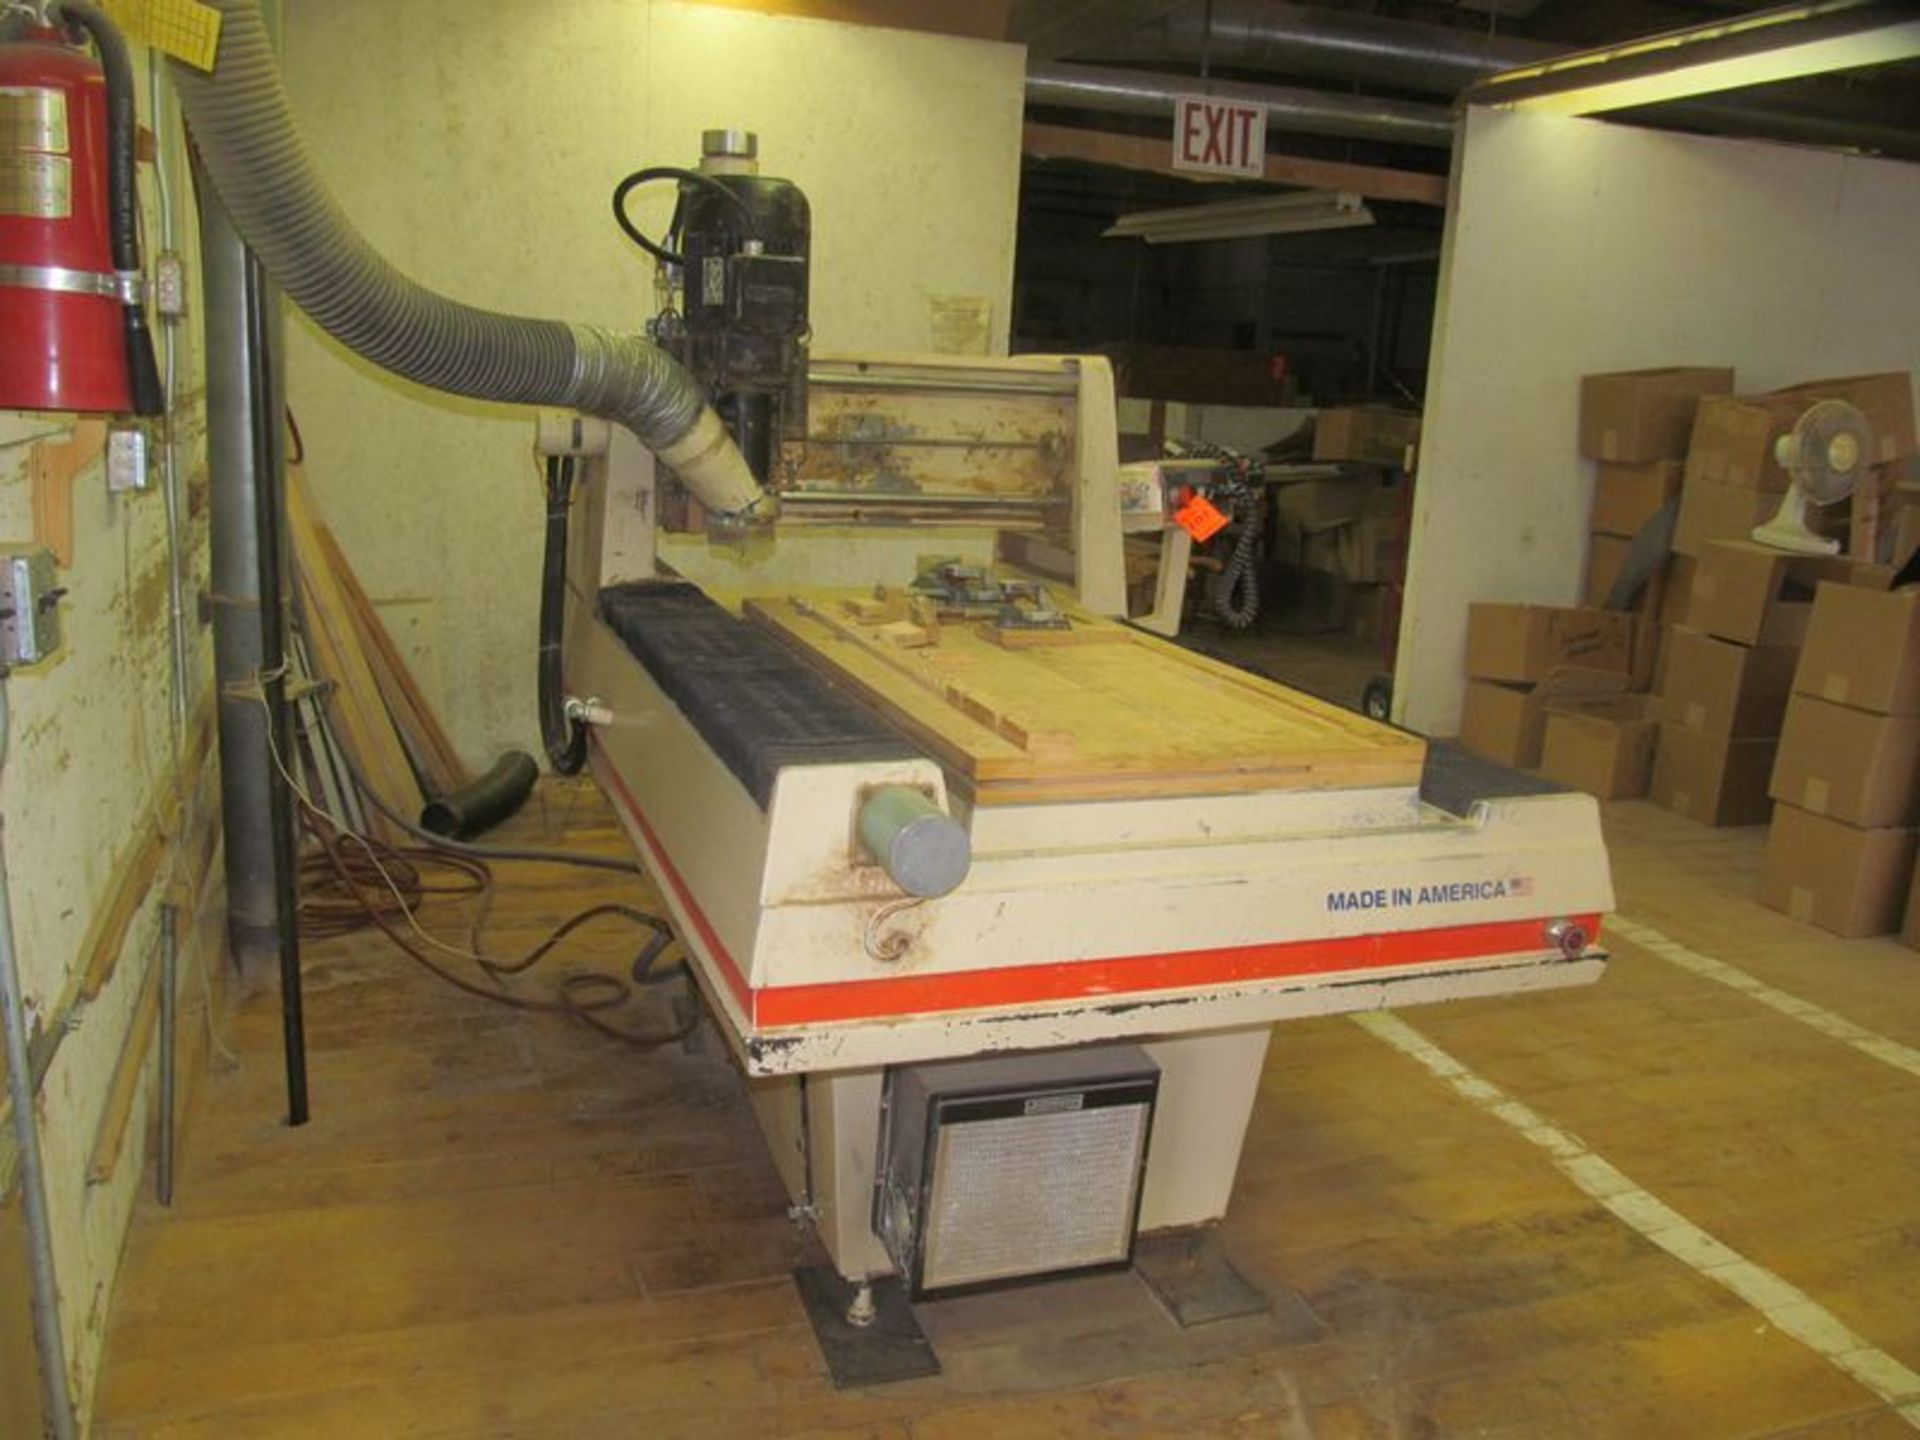 Thermwood Cartesian 5 CNC router, M/N C20, S/N 15VPA00060485R, with 12 HP spindle, 3 PH, 220V, 15. - Image 3 of 4